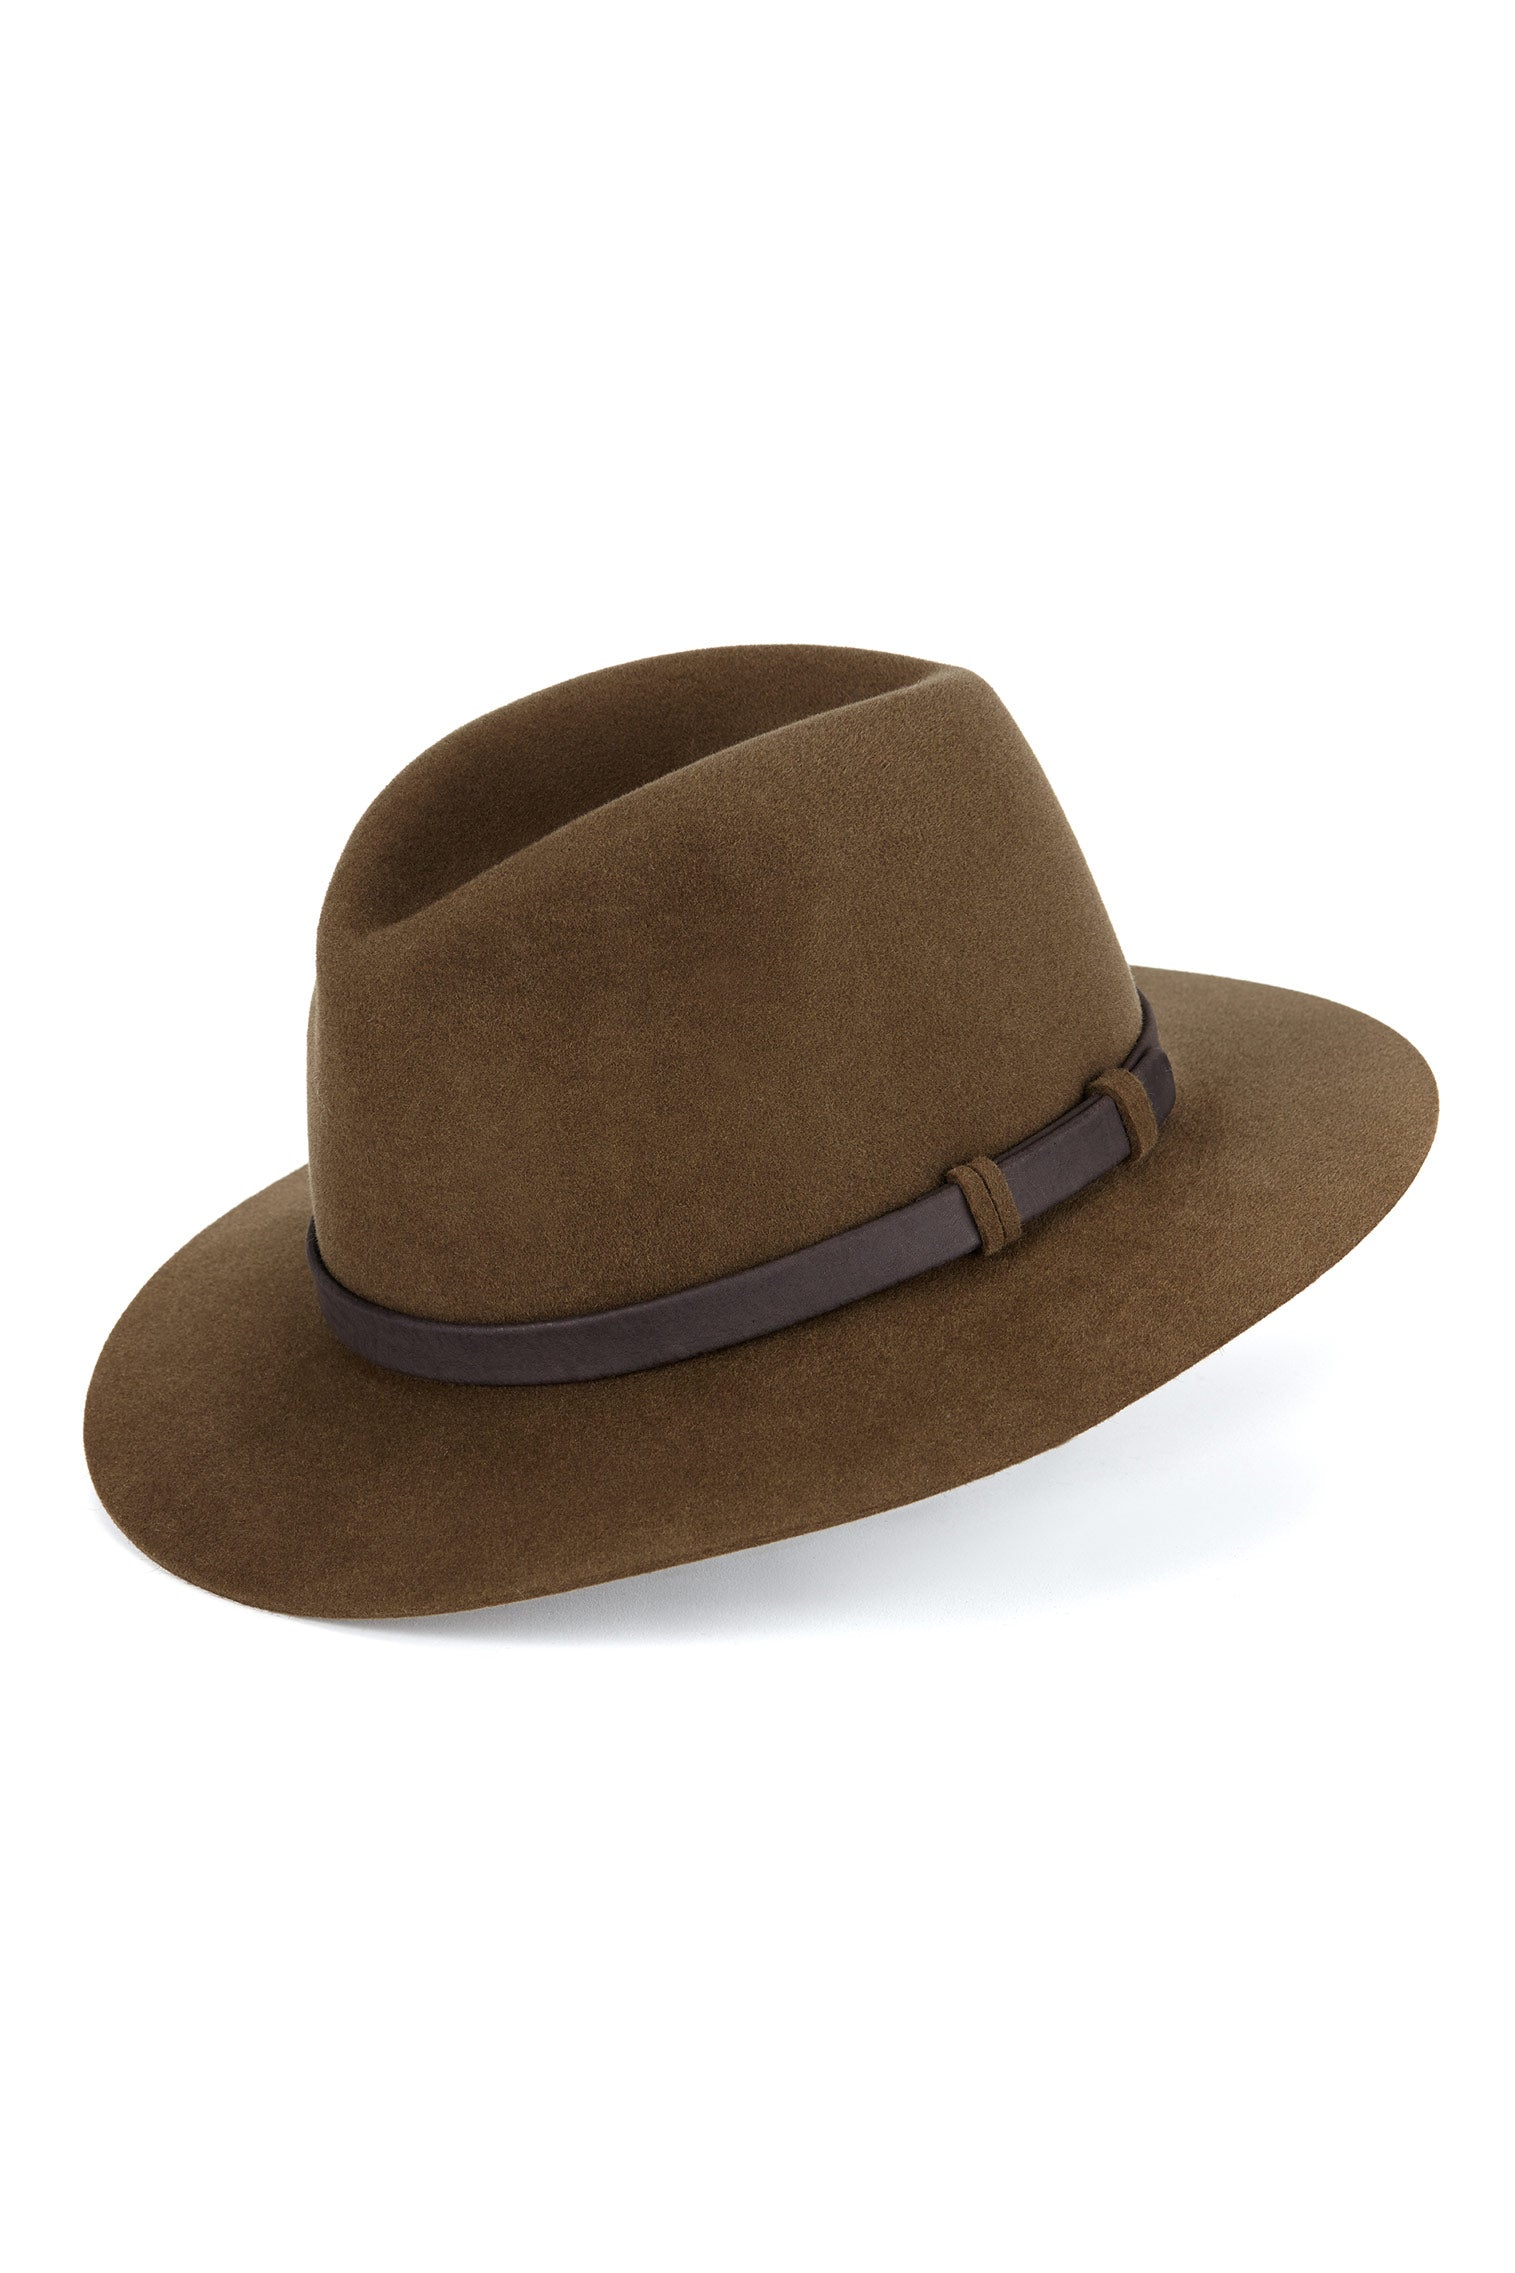 Chepstow Trilby - Cheltenham Collection - Lock & Co. Hatters London UK